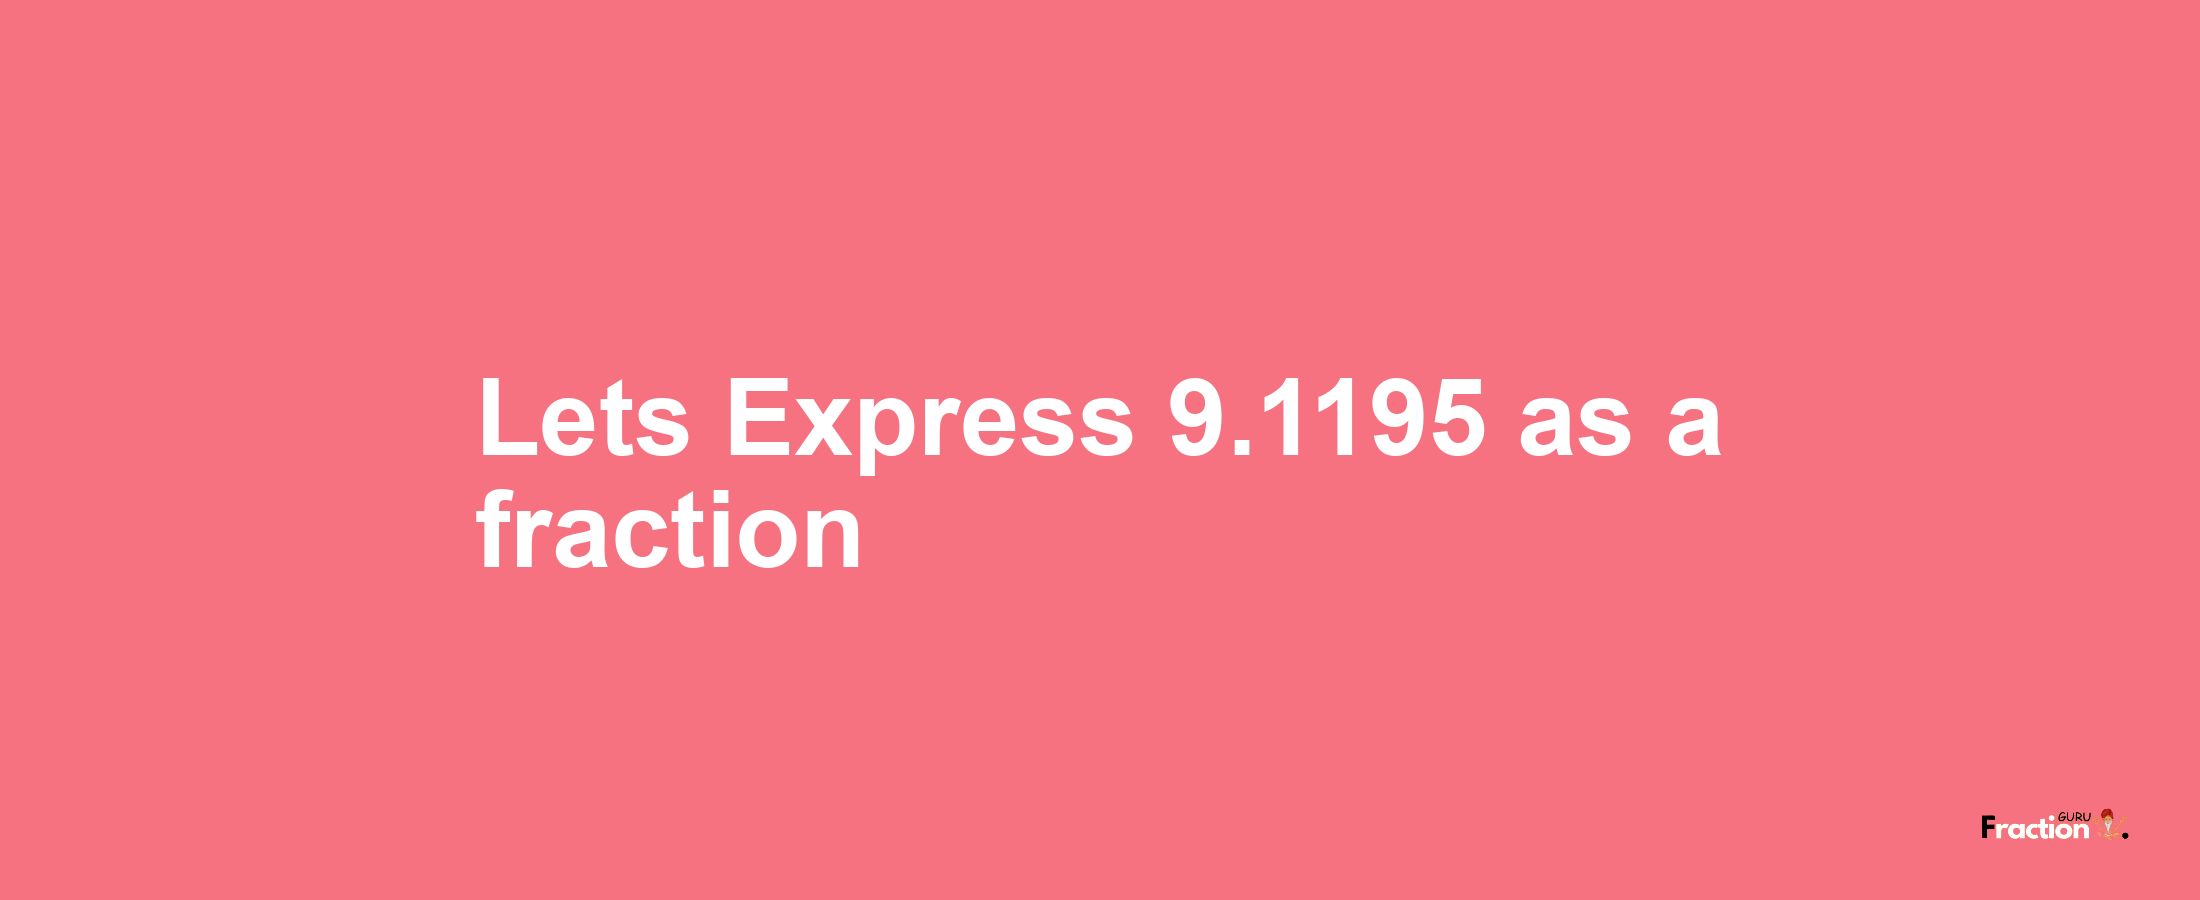 Lets Express 9.1195 as afraction